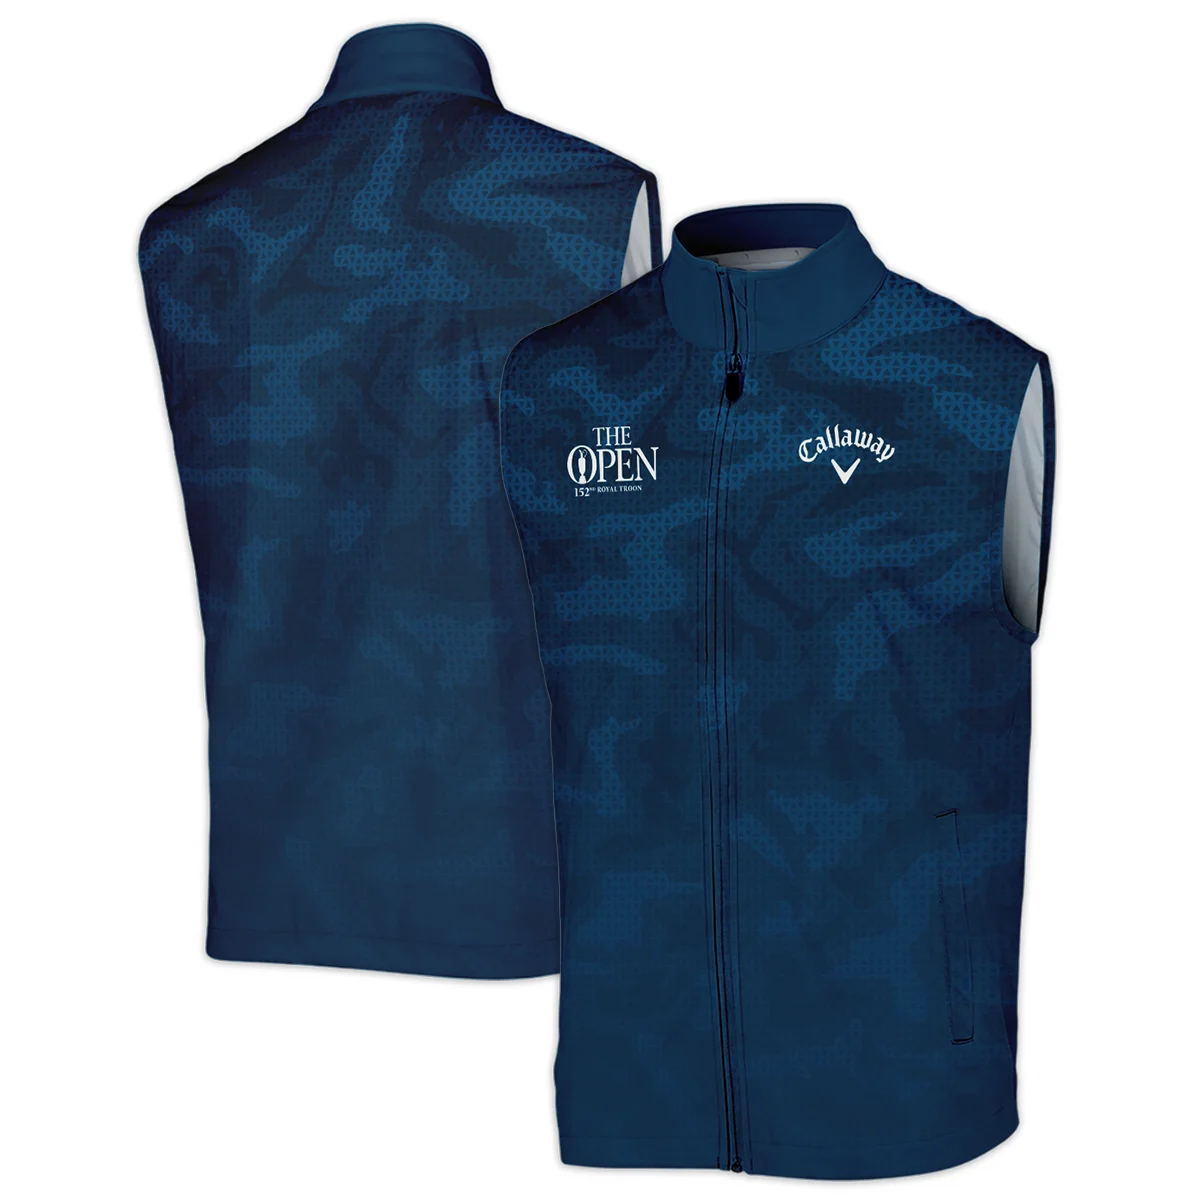 Callaway 152nd Open Championship Dark Blue Abstract Background Sleeveless Jacket All Over Prints HOTOP260624A02CLWSJK